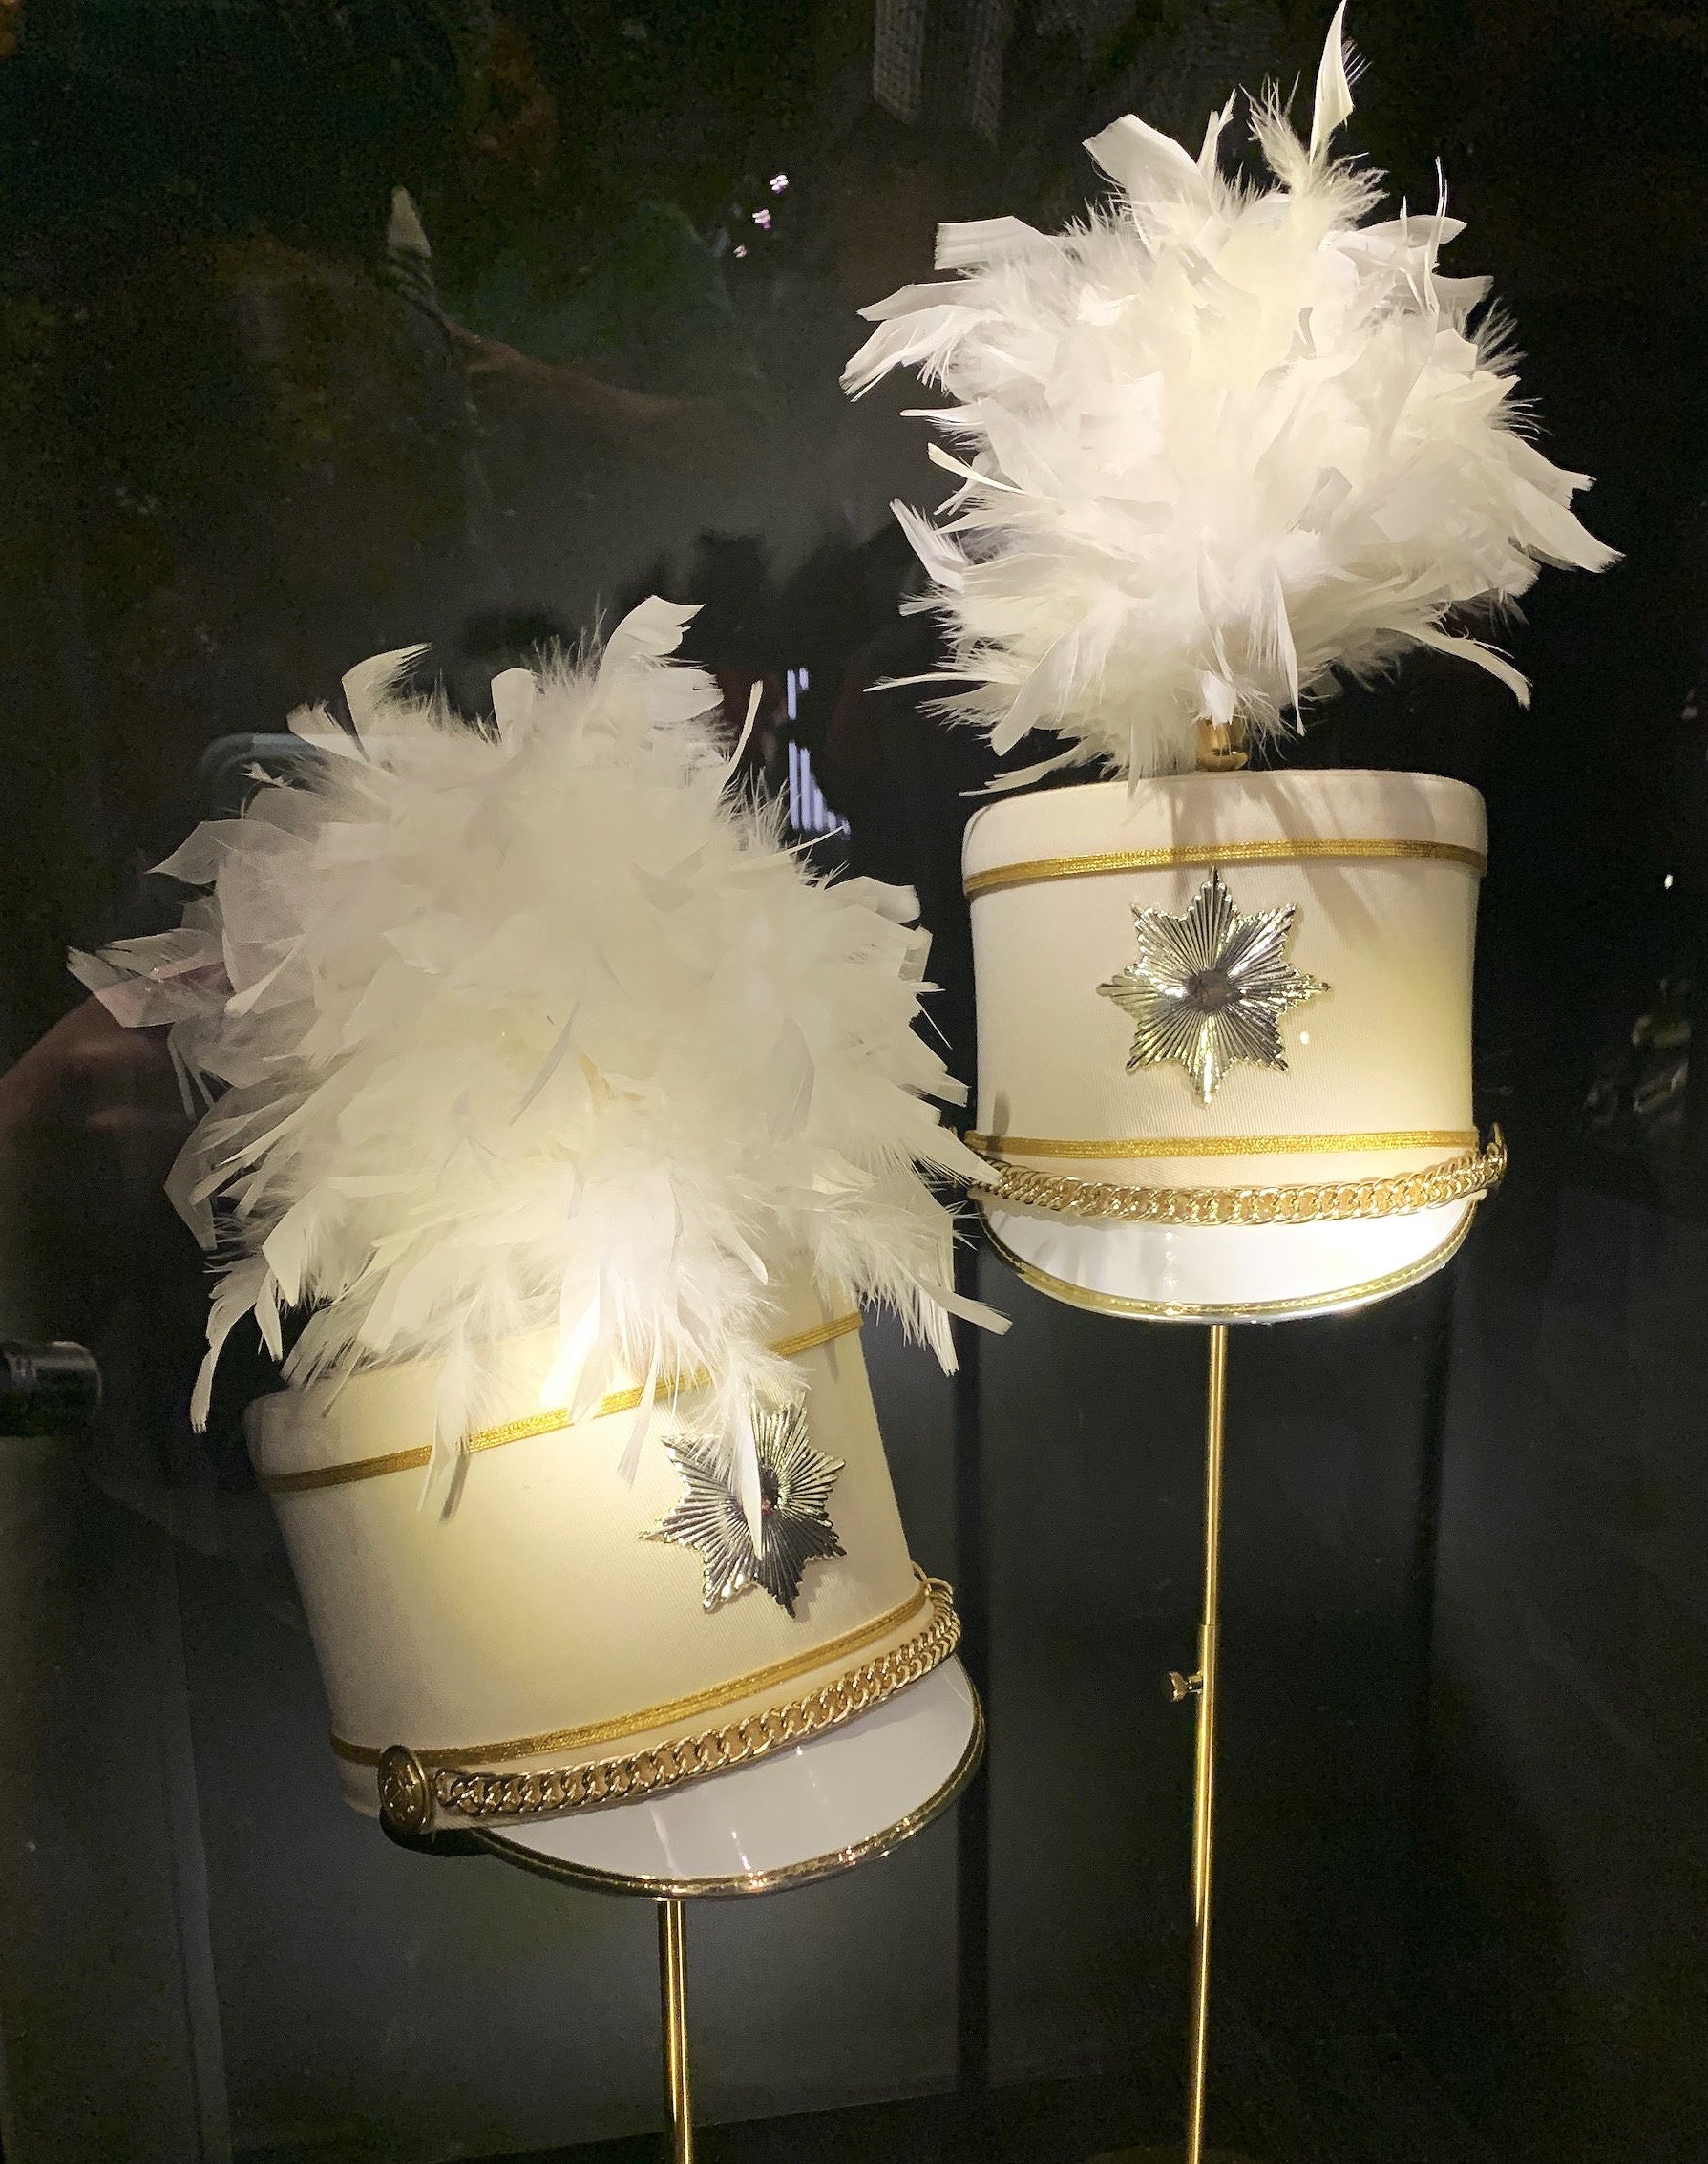  Hats worn by Hugh Jackman and Sutton Foster in  The Music Man  